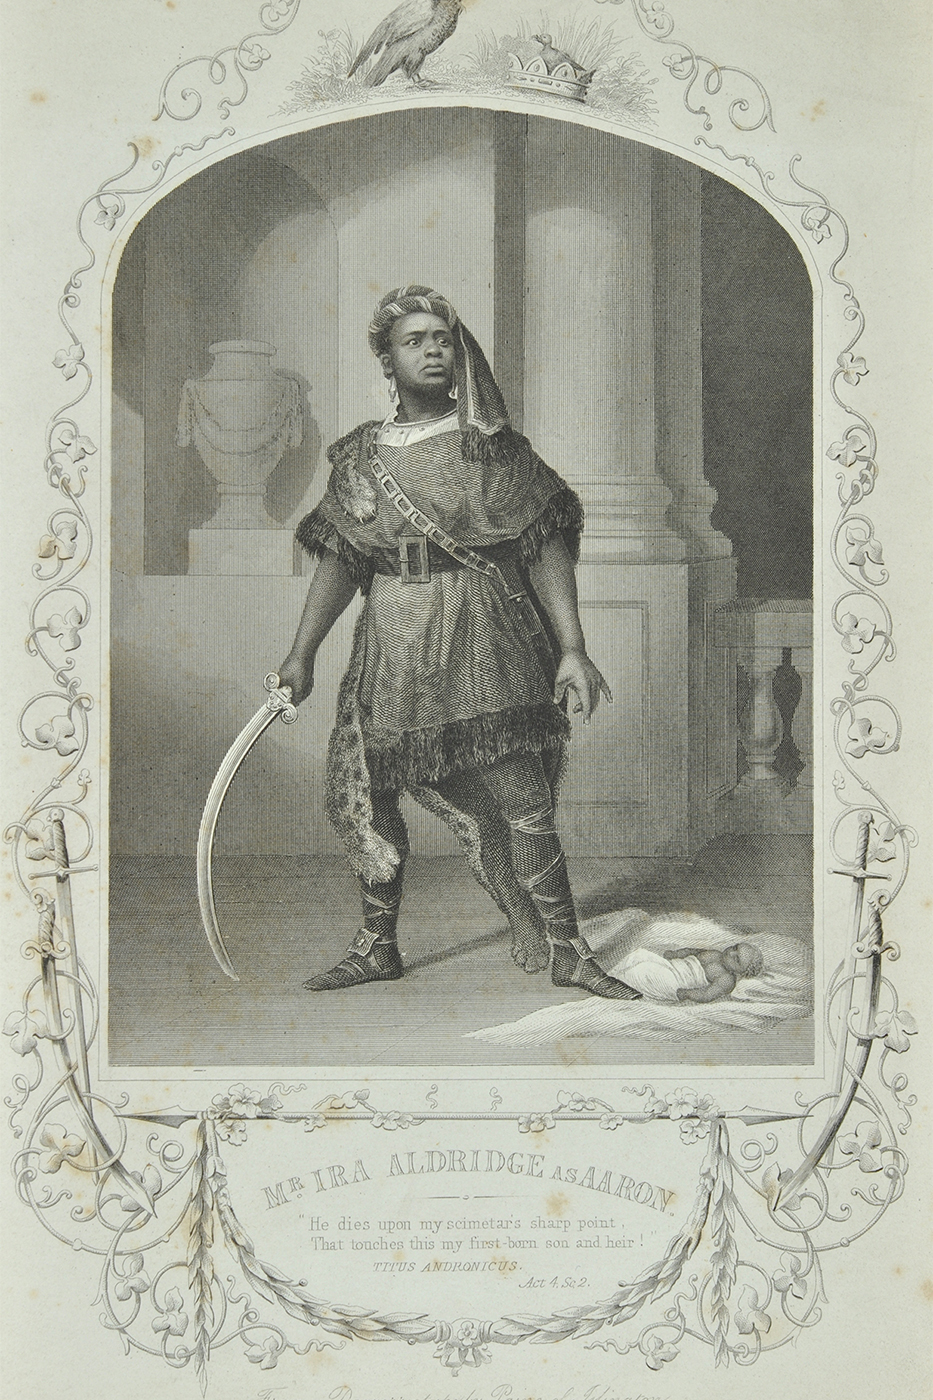 An illustrated portrait of Ira Aldridge in a palace, wearing a turban, toga, and cheetah skin.